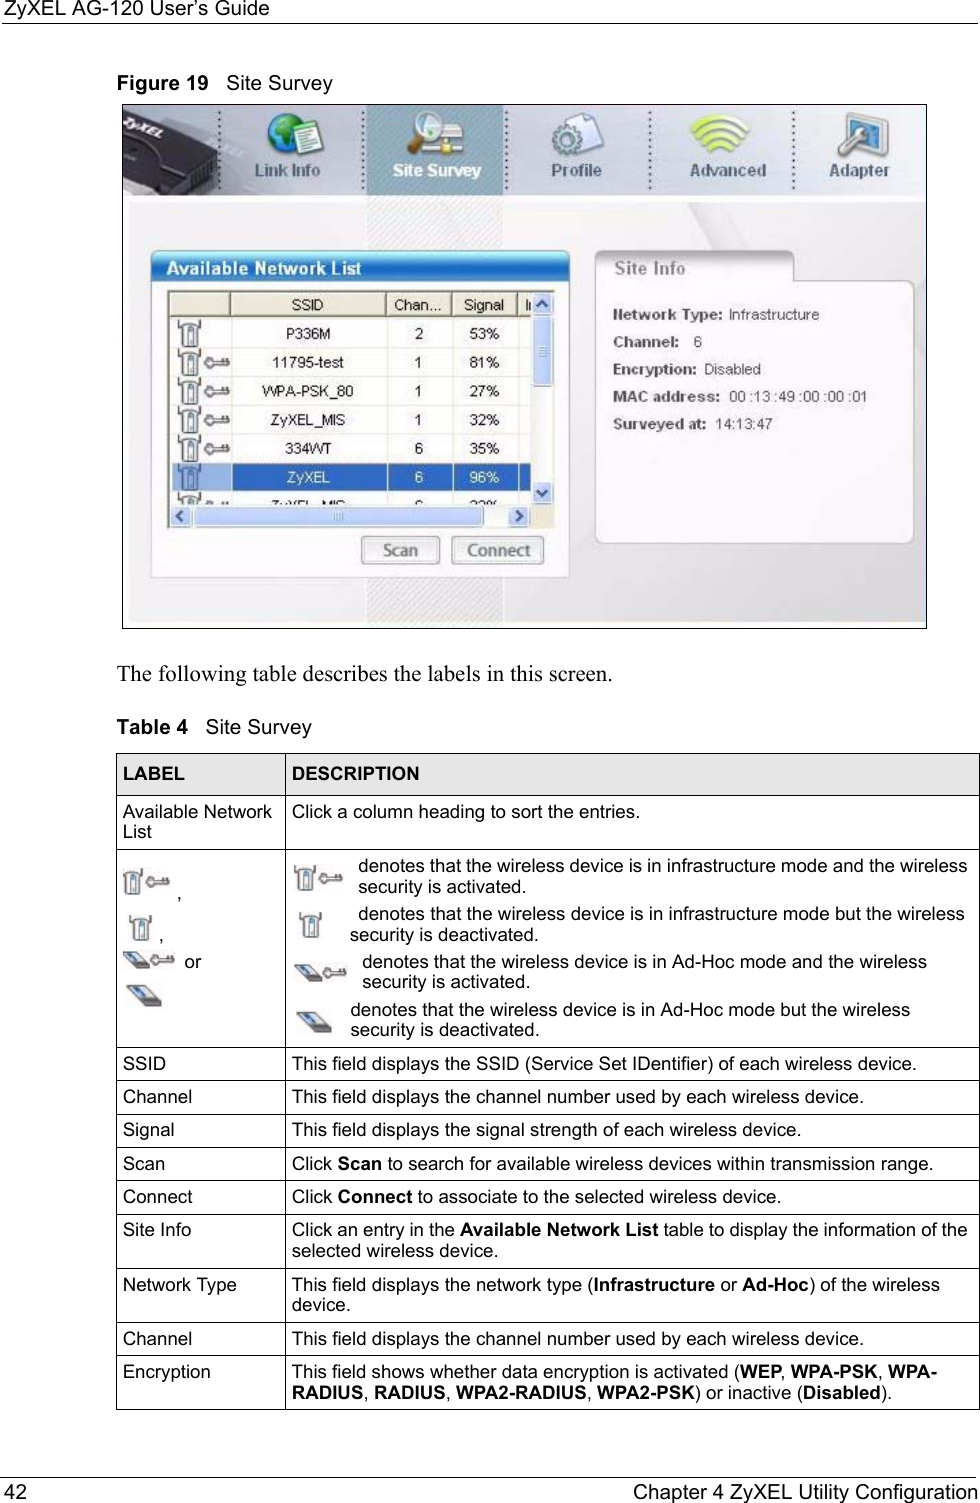 ZyXEL AG-120 User’s Guide42 Chapter 4 ZyXEL Utility ConfigurationFigure 19   Site Survey The following table describes the labels in this screen. Table 4   Site Survey LABEL DESCRIPTIONAvailable Network ListClick a column heading to sort the entries.,, ordenotes that the wireless device is in infrastructure mode and the wireless security is activated.denotes that the wireless device is in infrastructure mode but the wireless security is deactivated.denotes that the wireless device is in Ad-Hoc mode and the wireless security is activated.denotes that the wireless device is in Ad-Hoc mode but the wireless security is deactivated.SSID This field displays the SSID (Service Set IDentifier) of each wireless device.Channel This field displays the channel number used by each wireless device.Signal This field displays the signal strength of each wireless device.Scan Click Scan to search for available wireless devices within transmission range.Connect Click Connect to associate to the selected wireless device.Site Info Click an entry in the Available Network List table to display the information of the selected wireless device.Network Type  This field displays the network type (Infrastructure or Ad-Hoc) of the wireless device.Channel This field displays the channel number used by each wireless device.Encryption This field shows whether data encryption is activated (WEP, WPA-PSK, WPA-RADIUS, RADIUS, WPA2-RADIUS, WPA2-PSK) or inactive (Disabled).